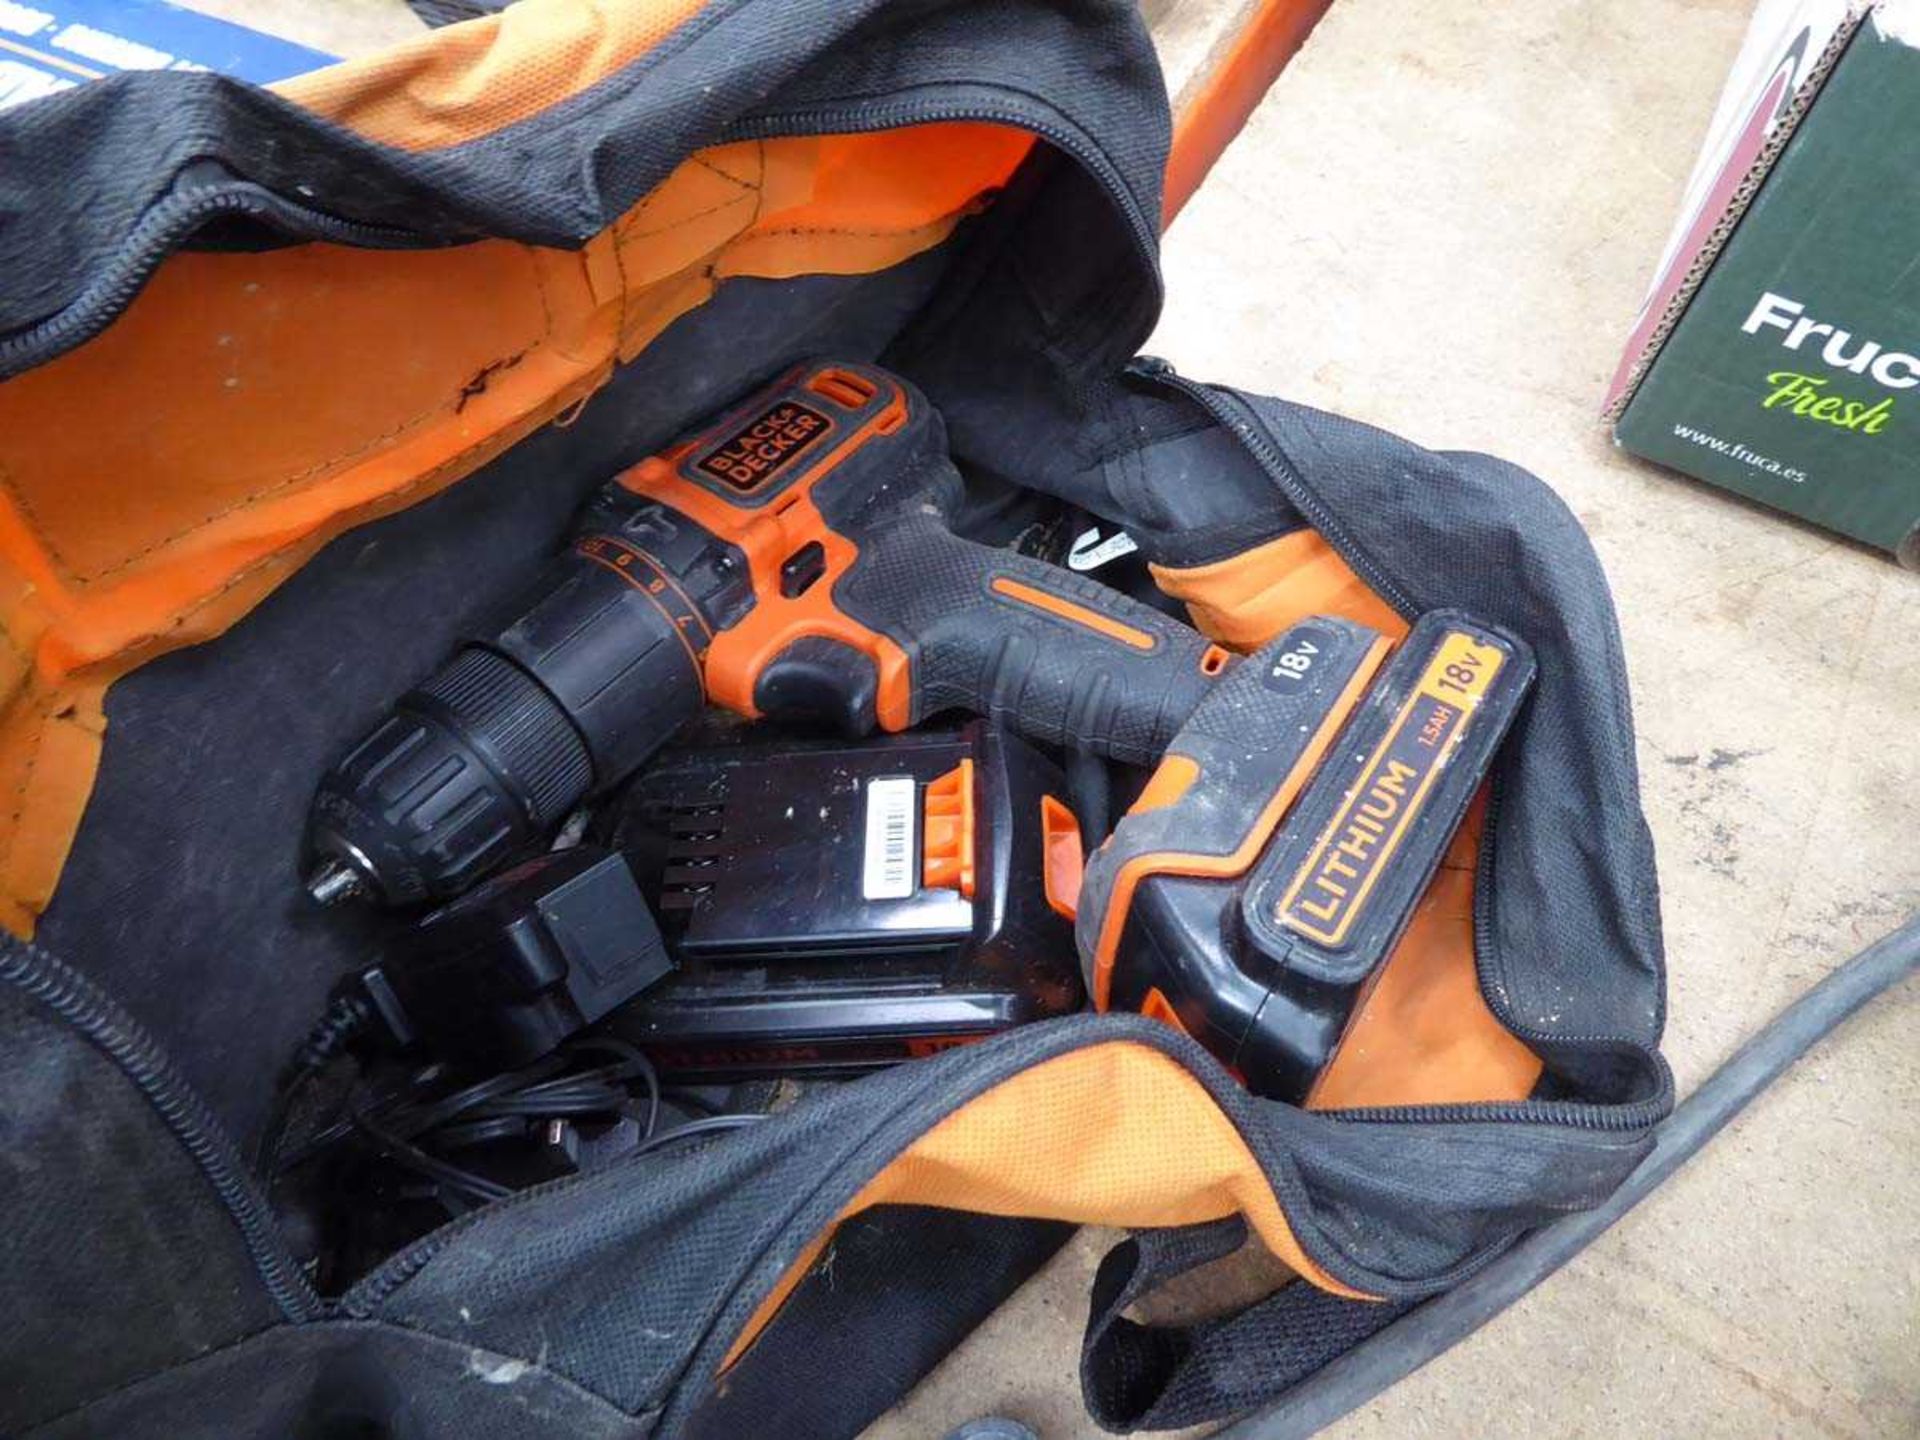 Black & Decker small battery drill with 2 batteries and charger